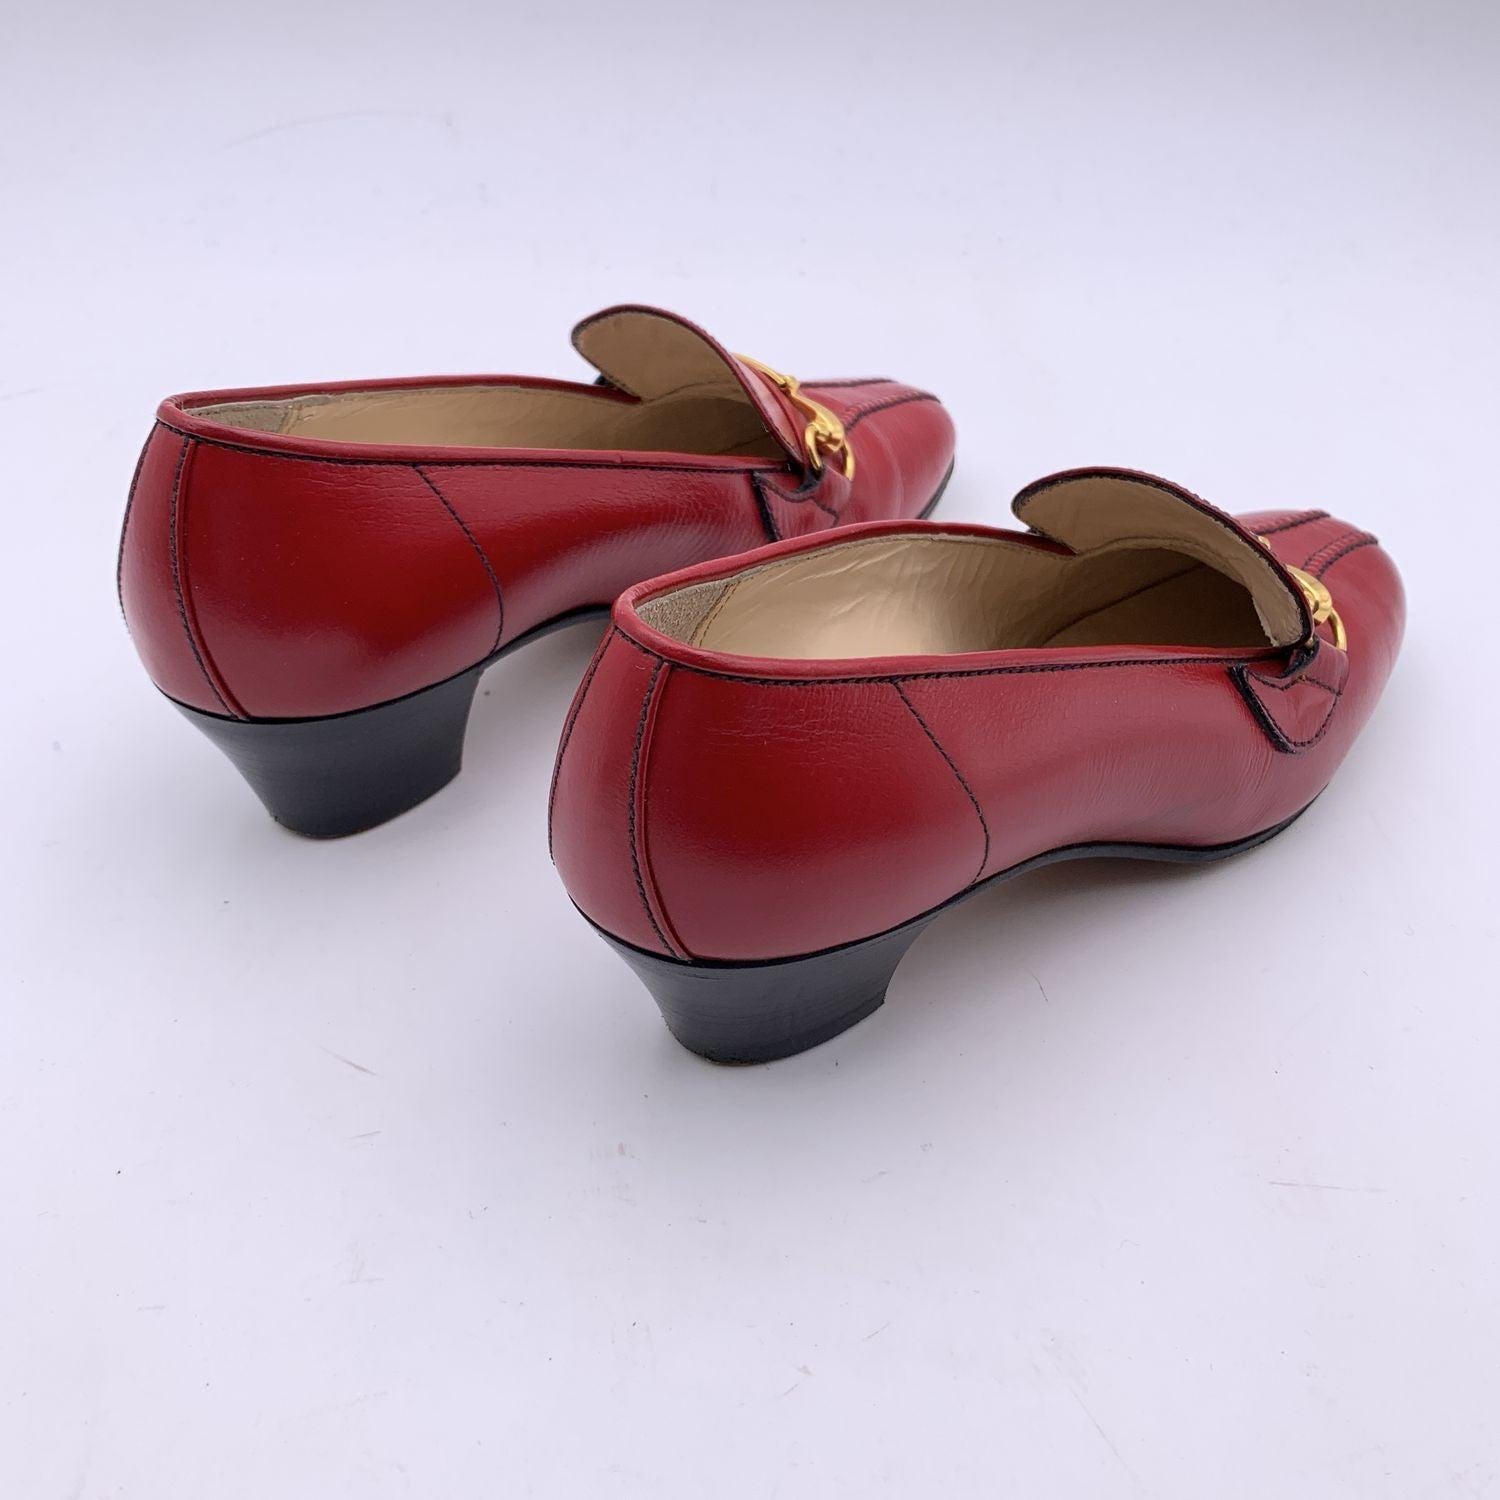 Gucci Vintage Red Leather Horsebit Shoes Loafers Size 35.5 For Sale 1